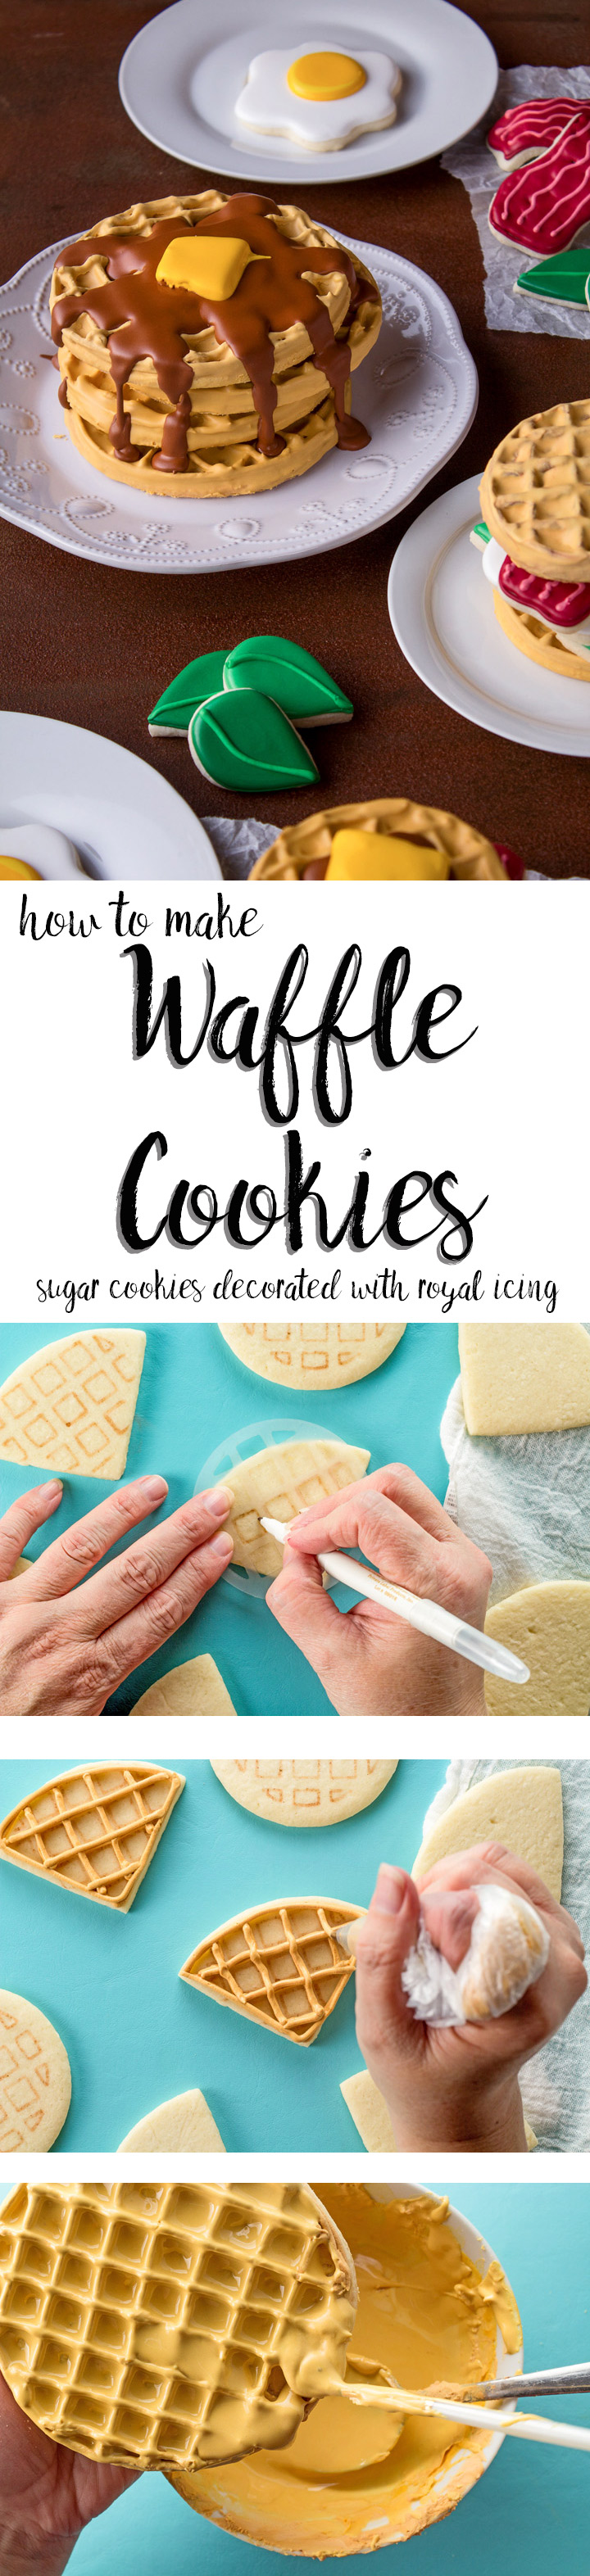 How to Make Wonderful Waffle Cookies with a How to Video | The Bearfoot Baker